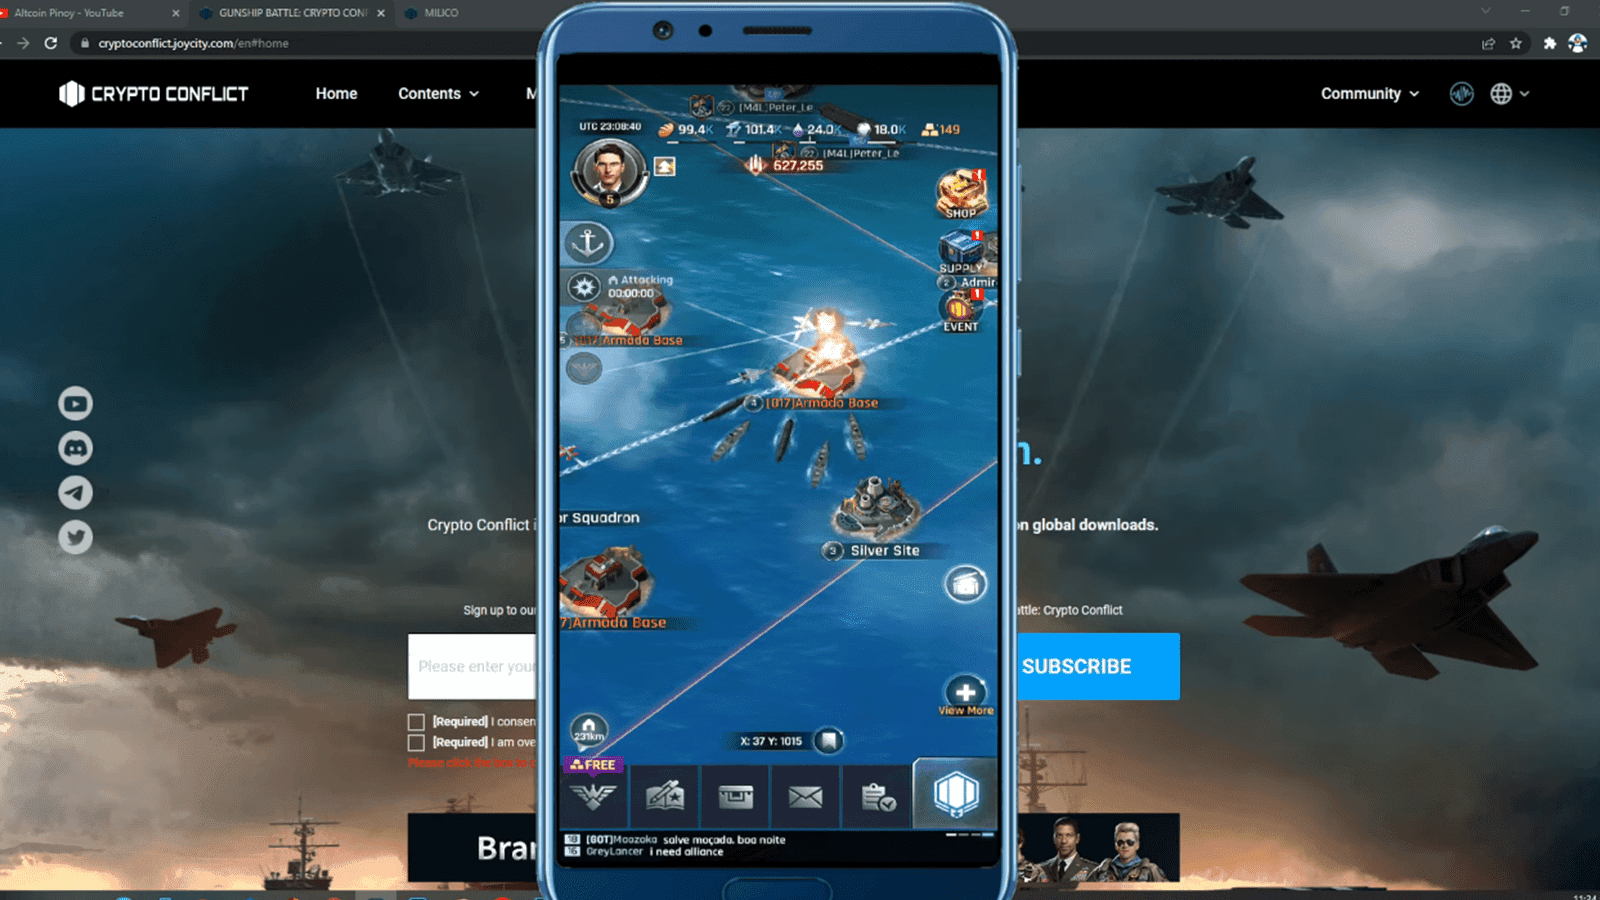 Gunship Battle Crypto Conflict - Game Review - Play Games image 3